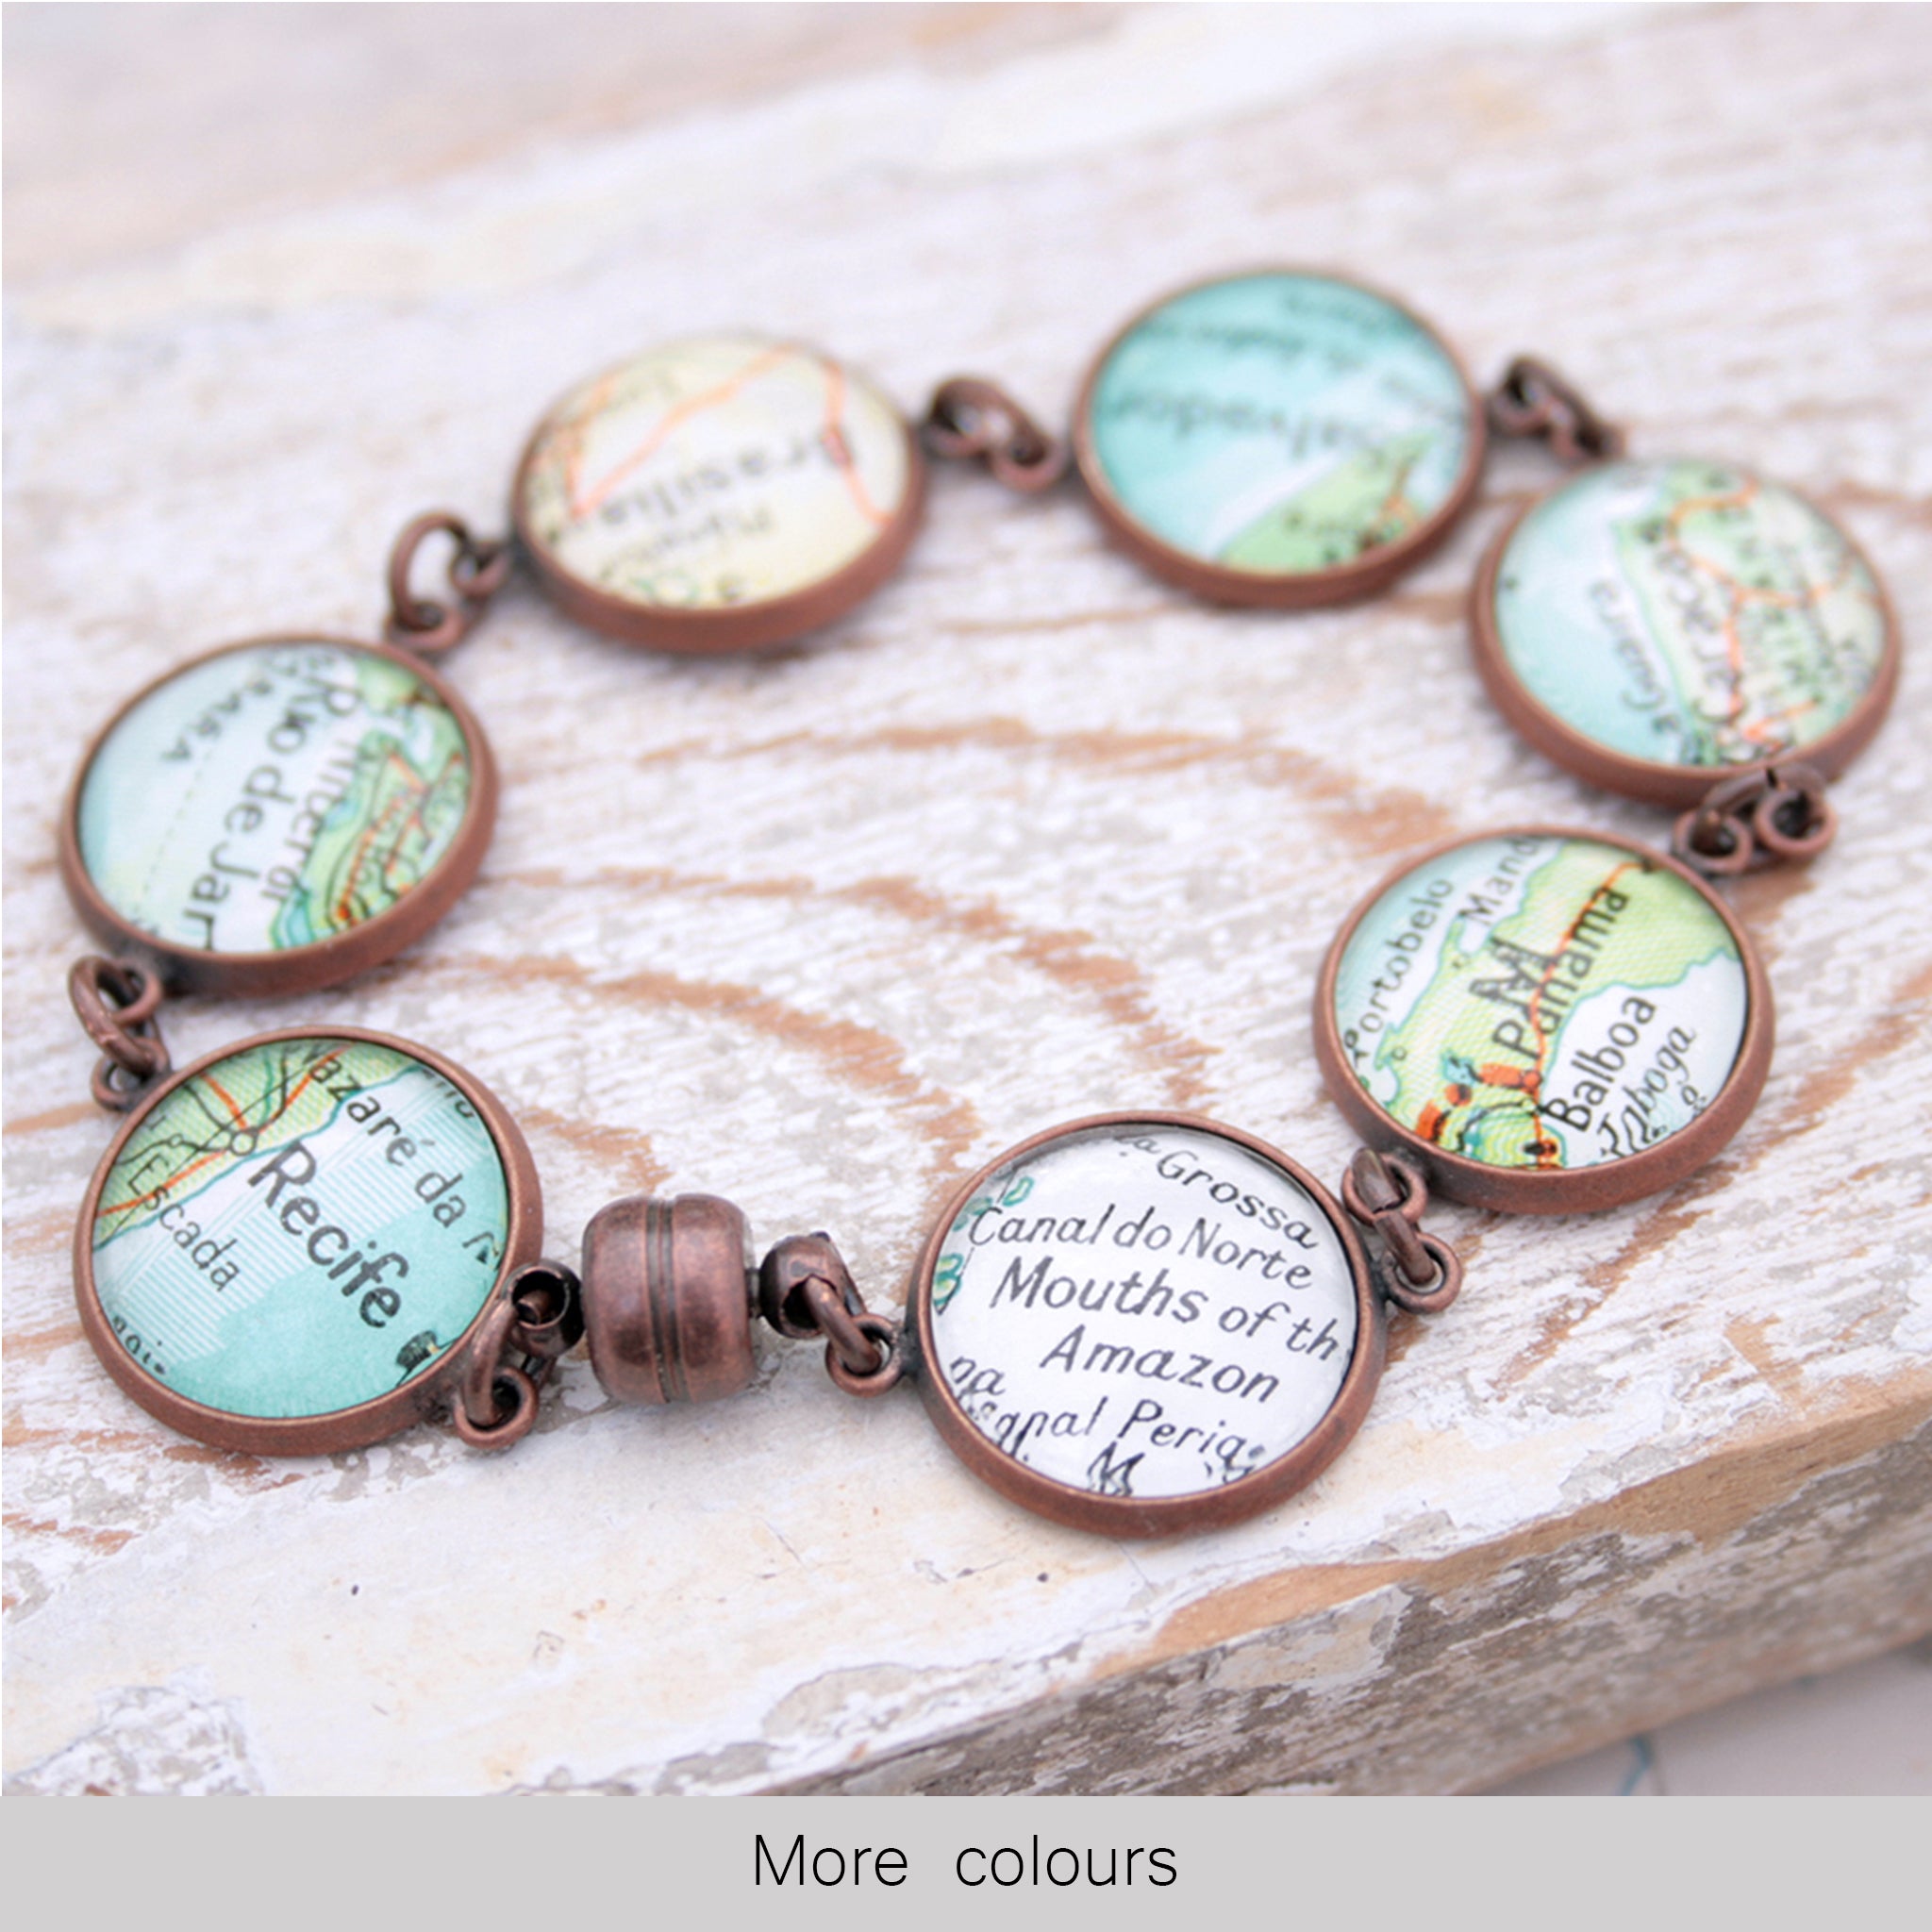 Antique copper beaded bracelet featuring different map locations